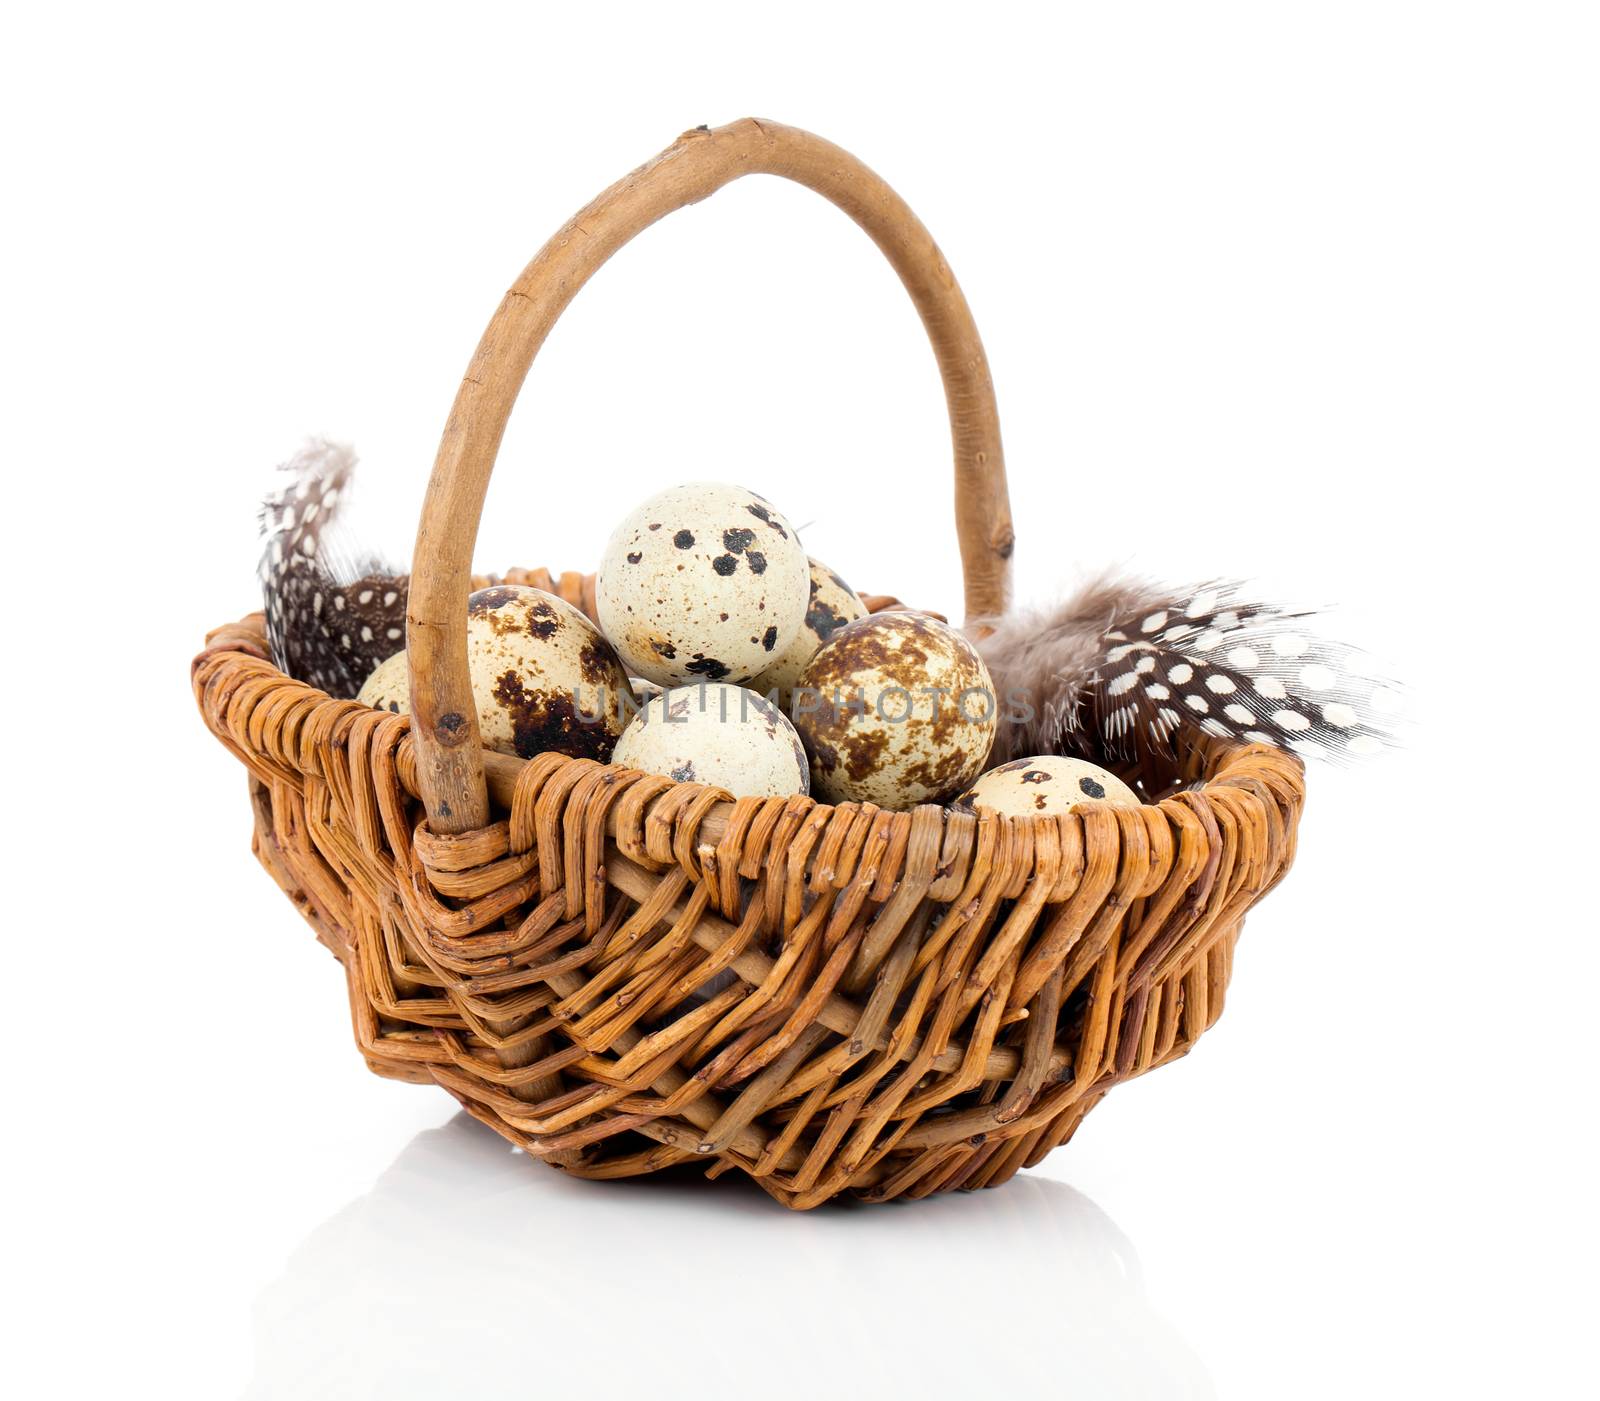 quail eggs in a wicker basket on white background